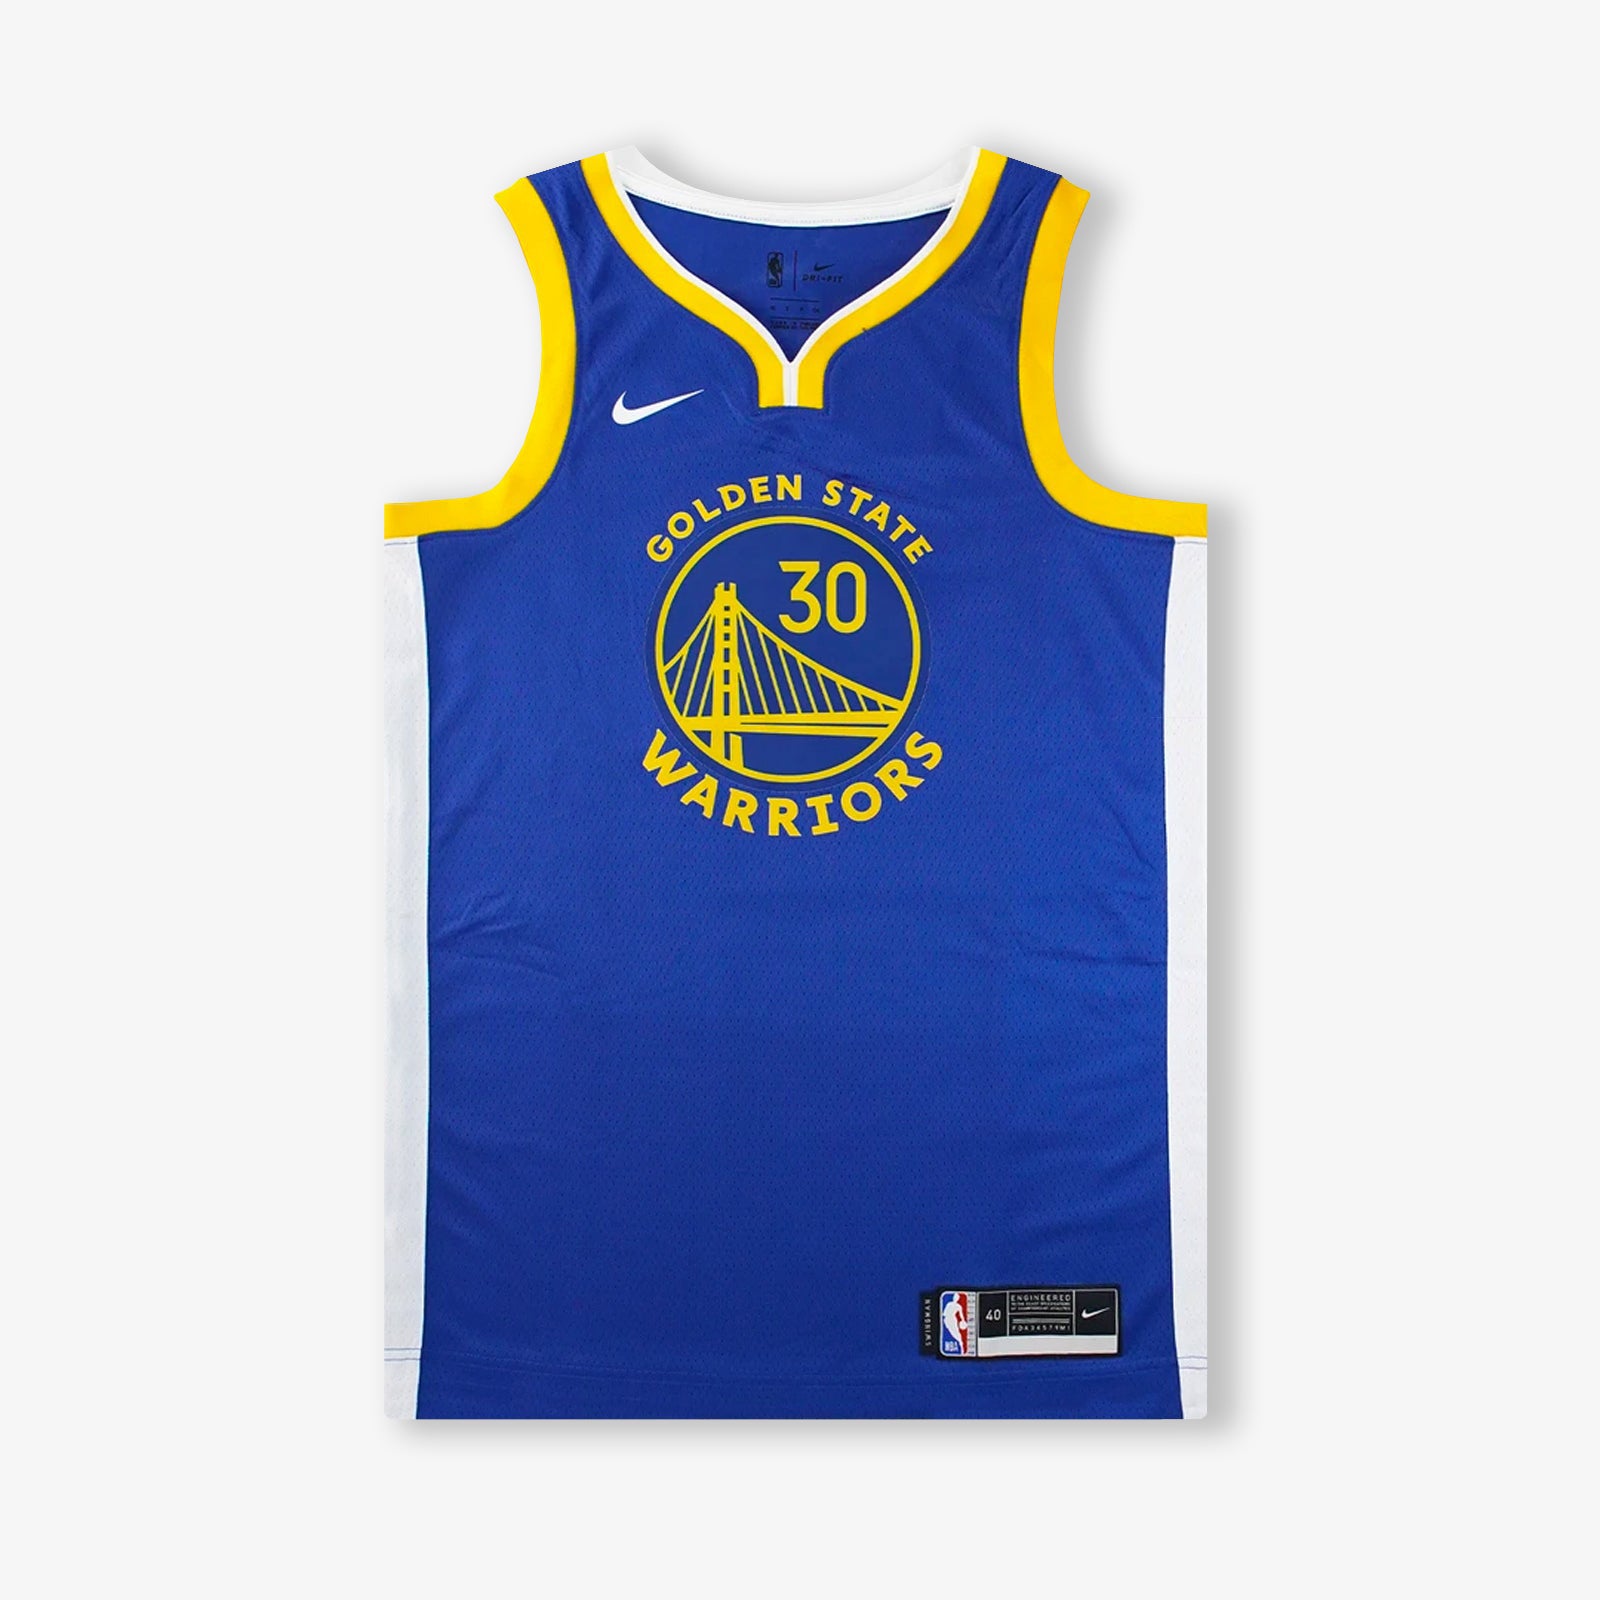 Stephen Curry Preschool Jersey - Blue Toddler Icon Jersey